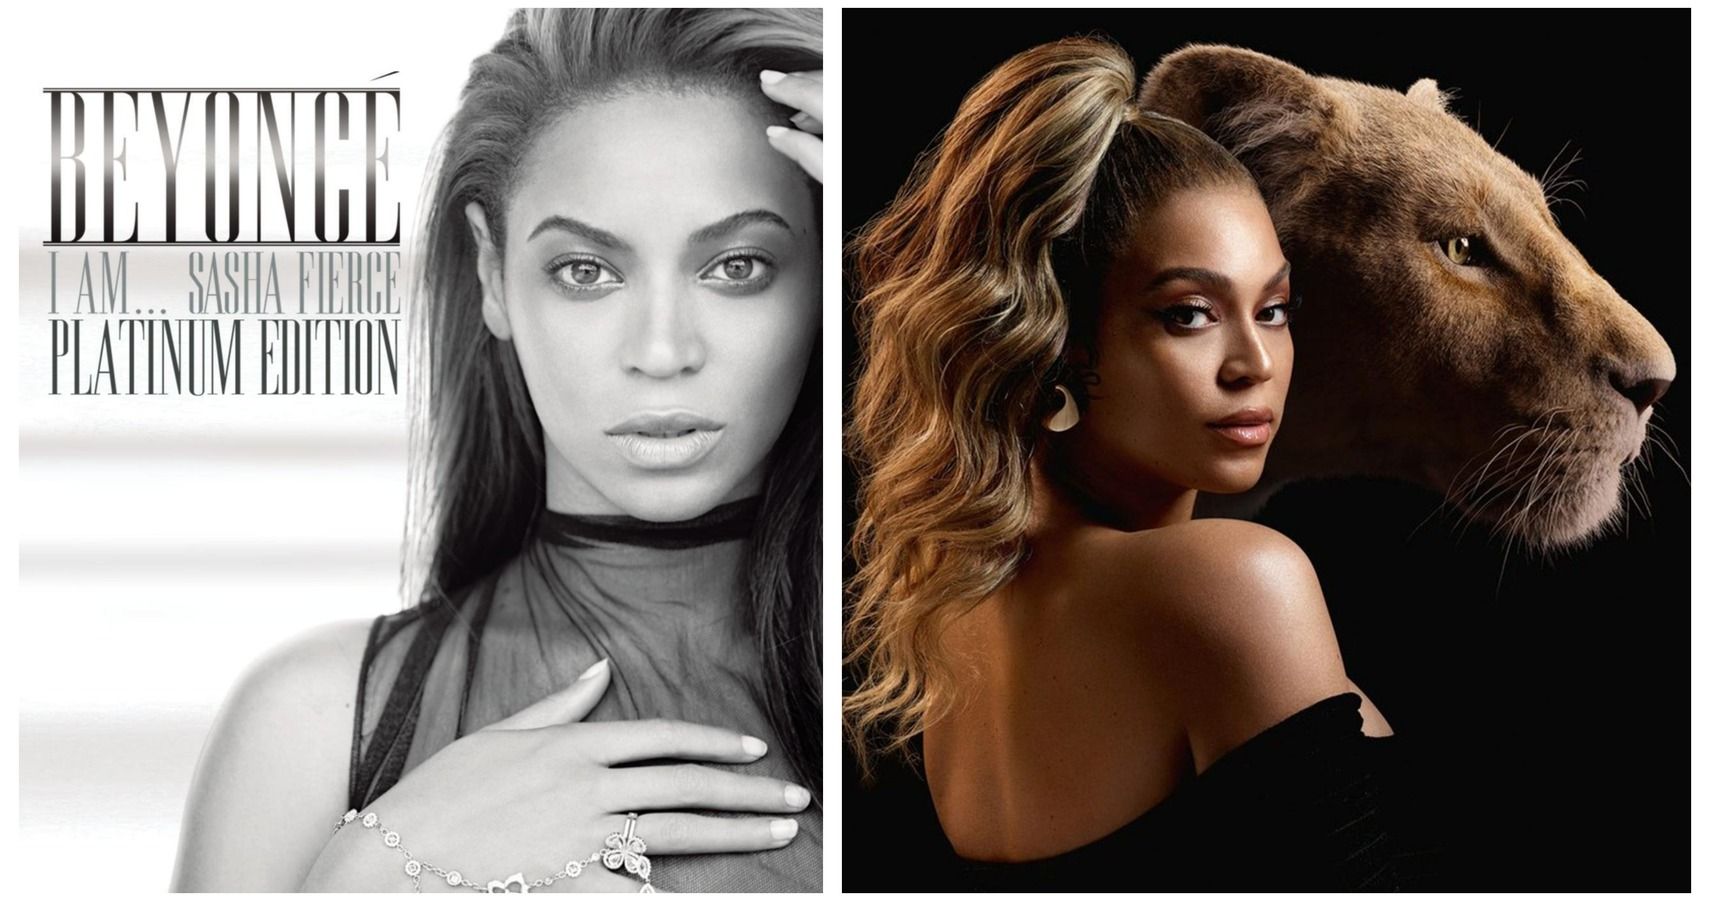 Beyoncé's HighestSelling Albums Of All Time, Ranked